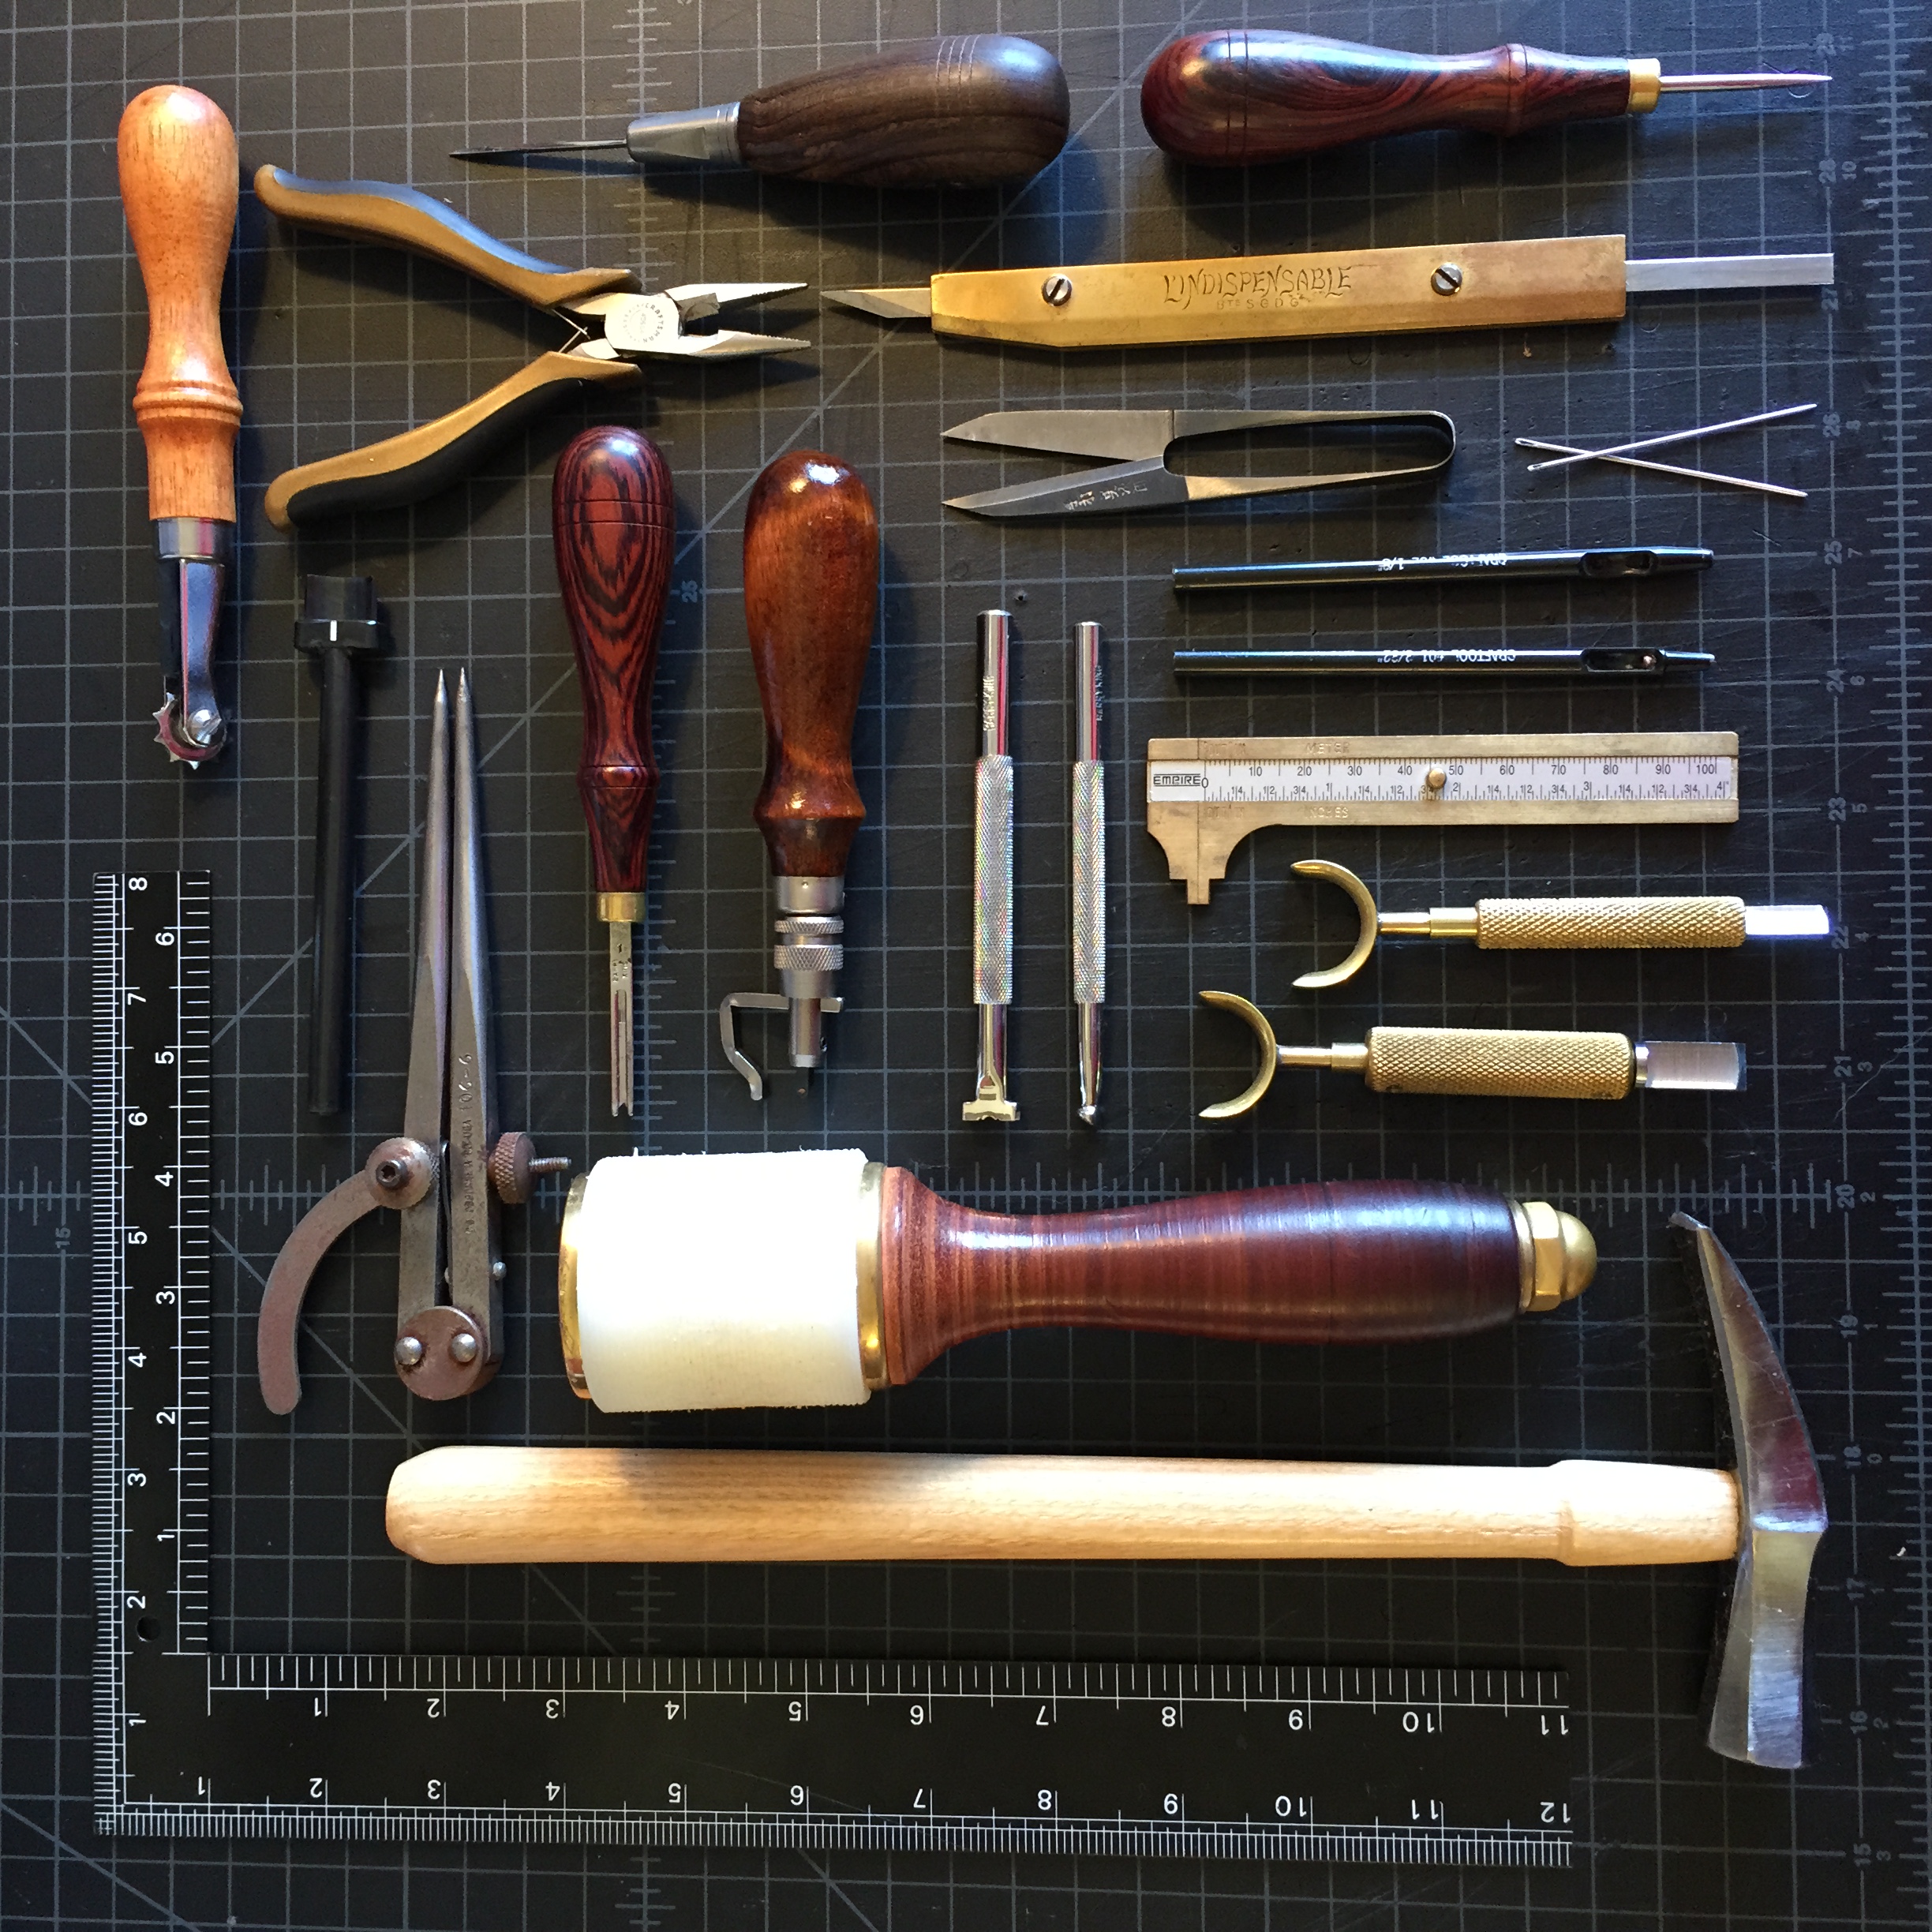 Tandy Leather Craft Tools in Craft Supplies 